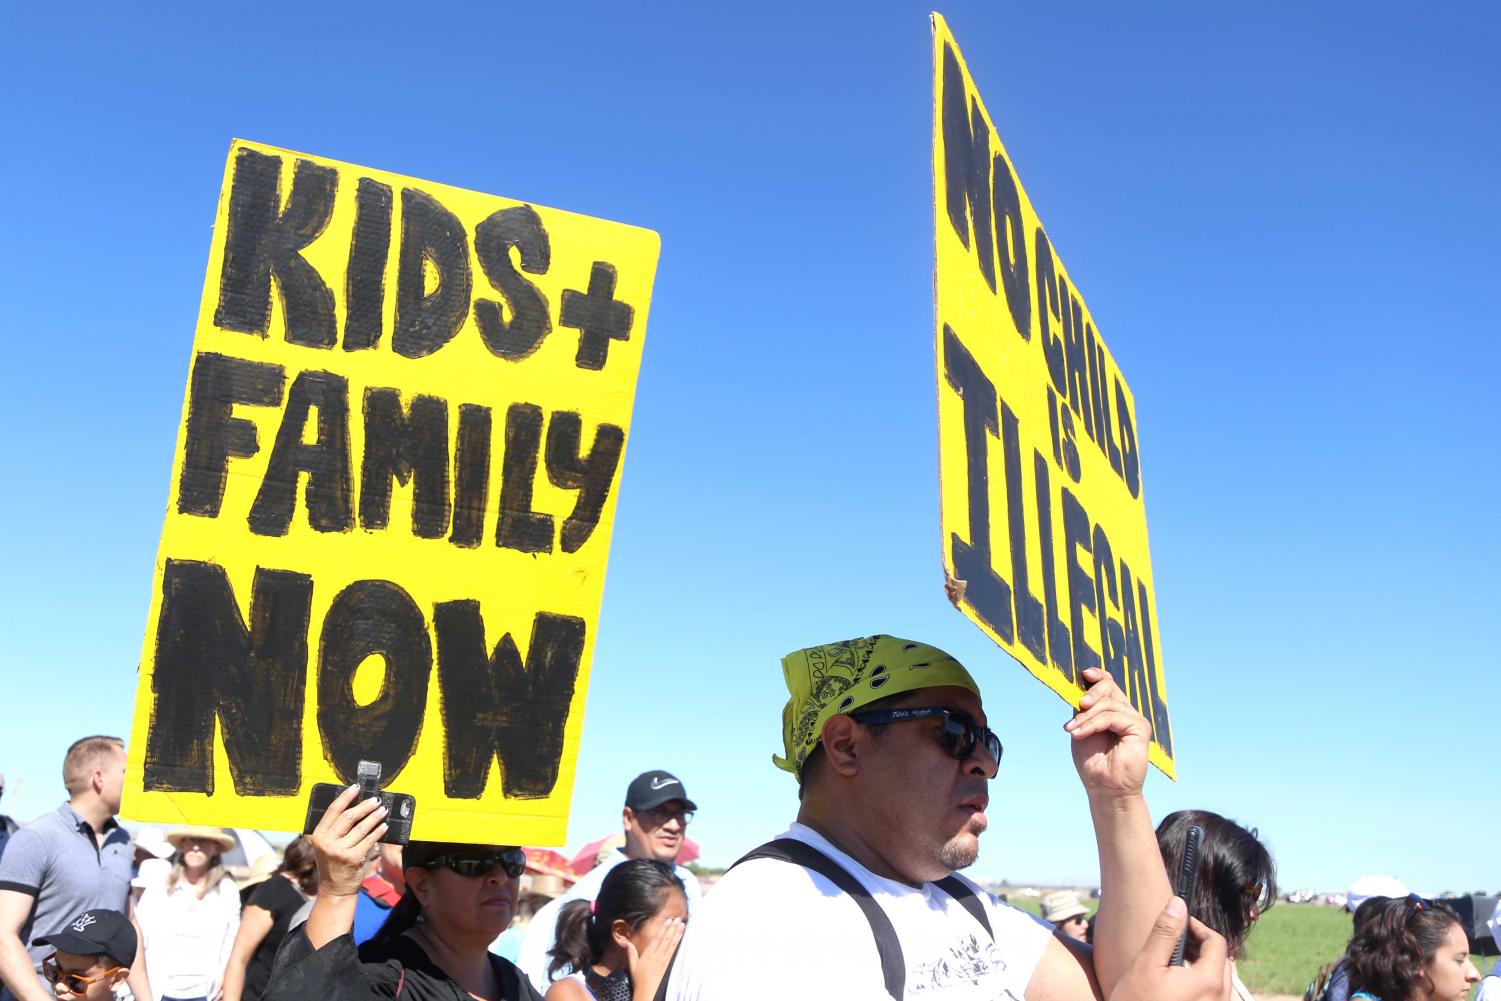 Hundreds+march+to+demand+an+end+to+family+separation+at+the+border